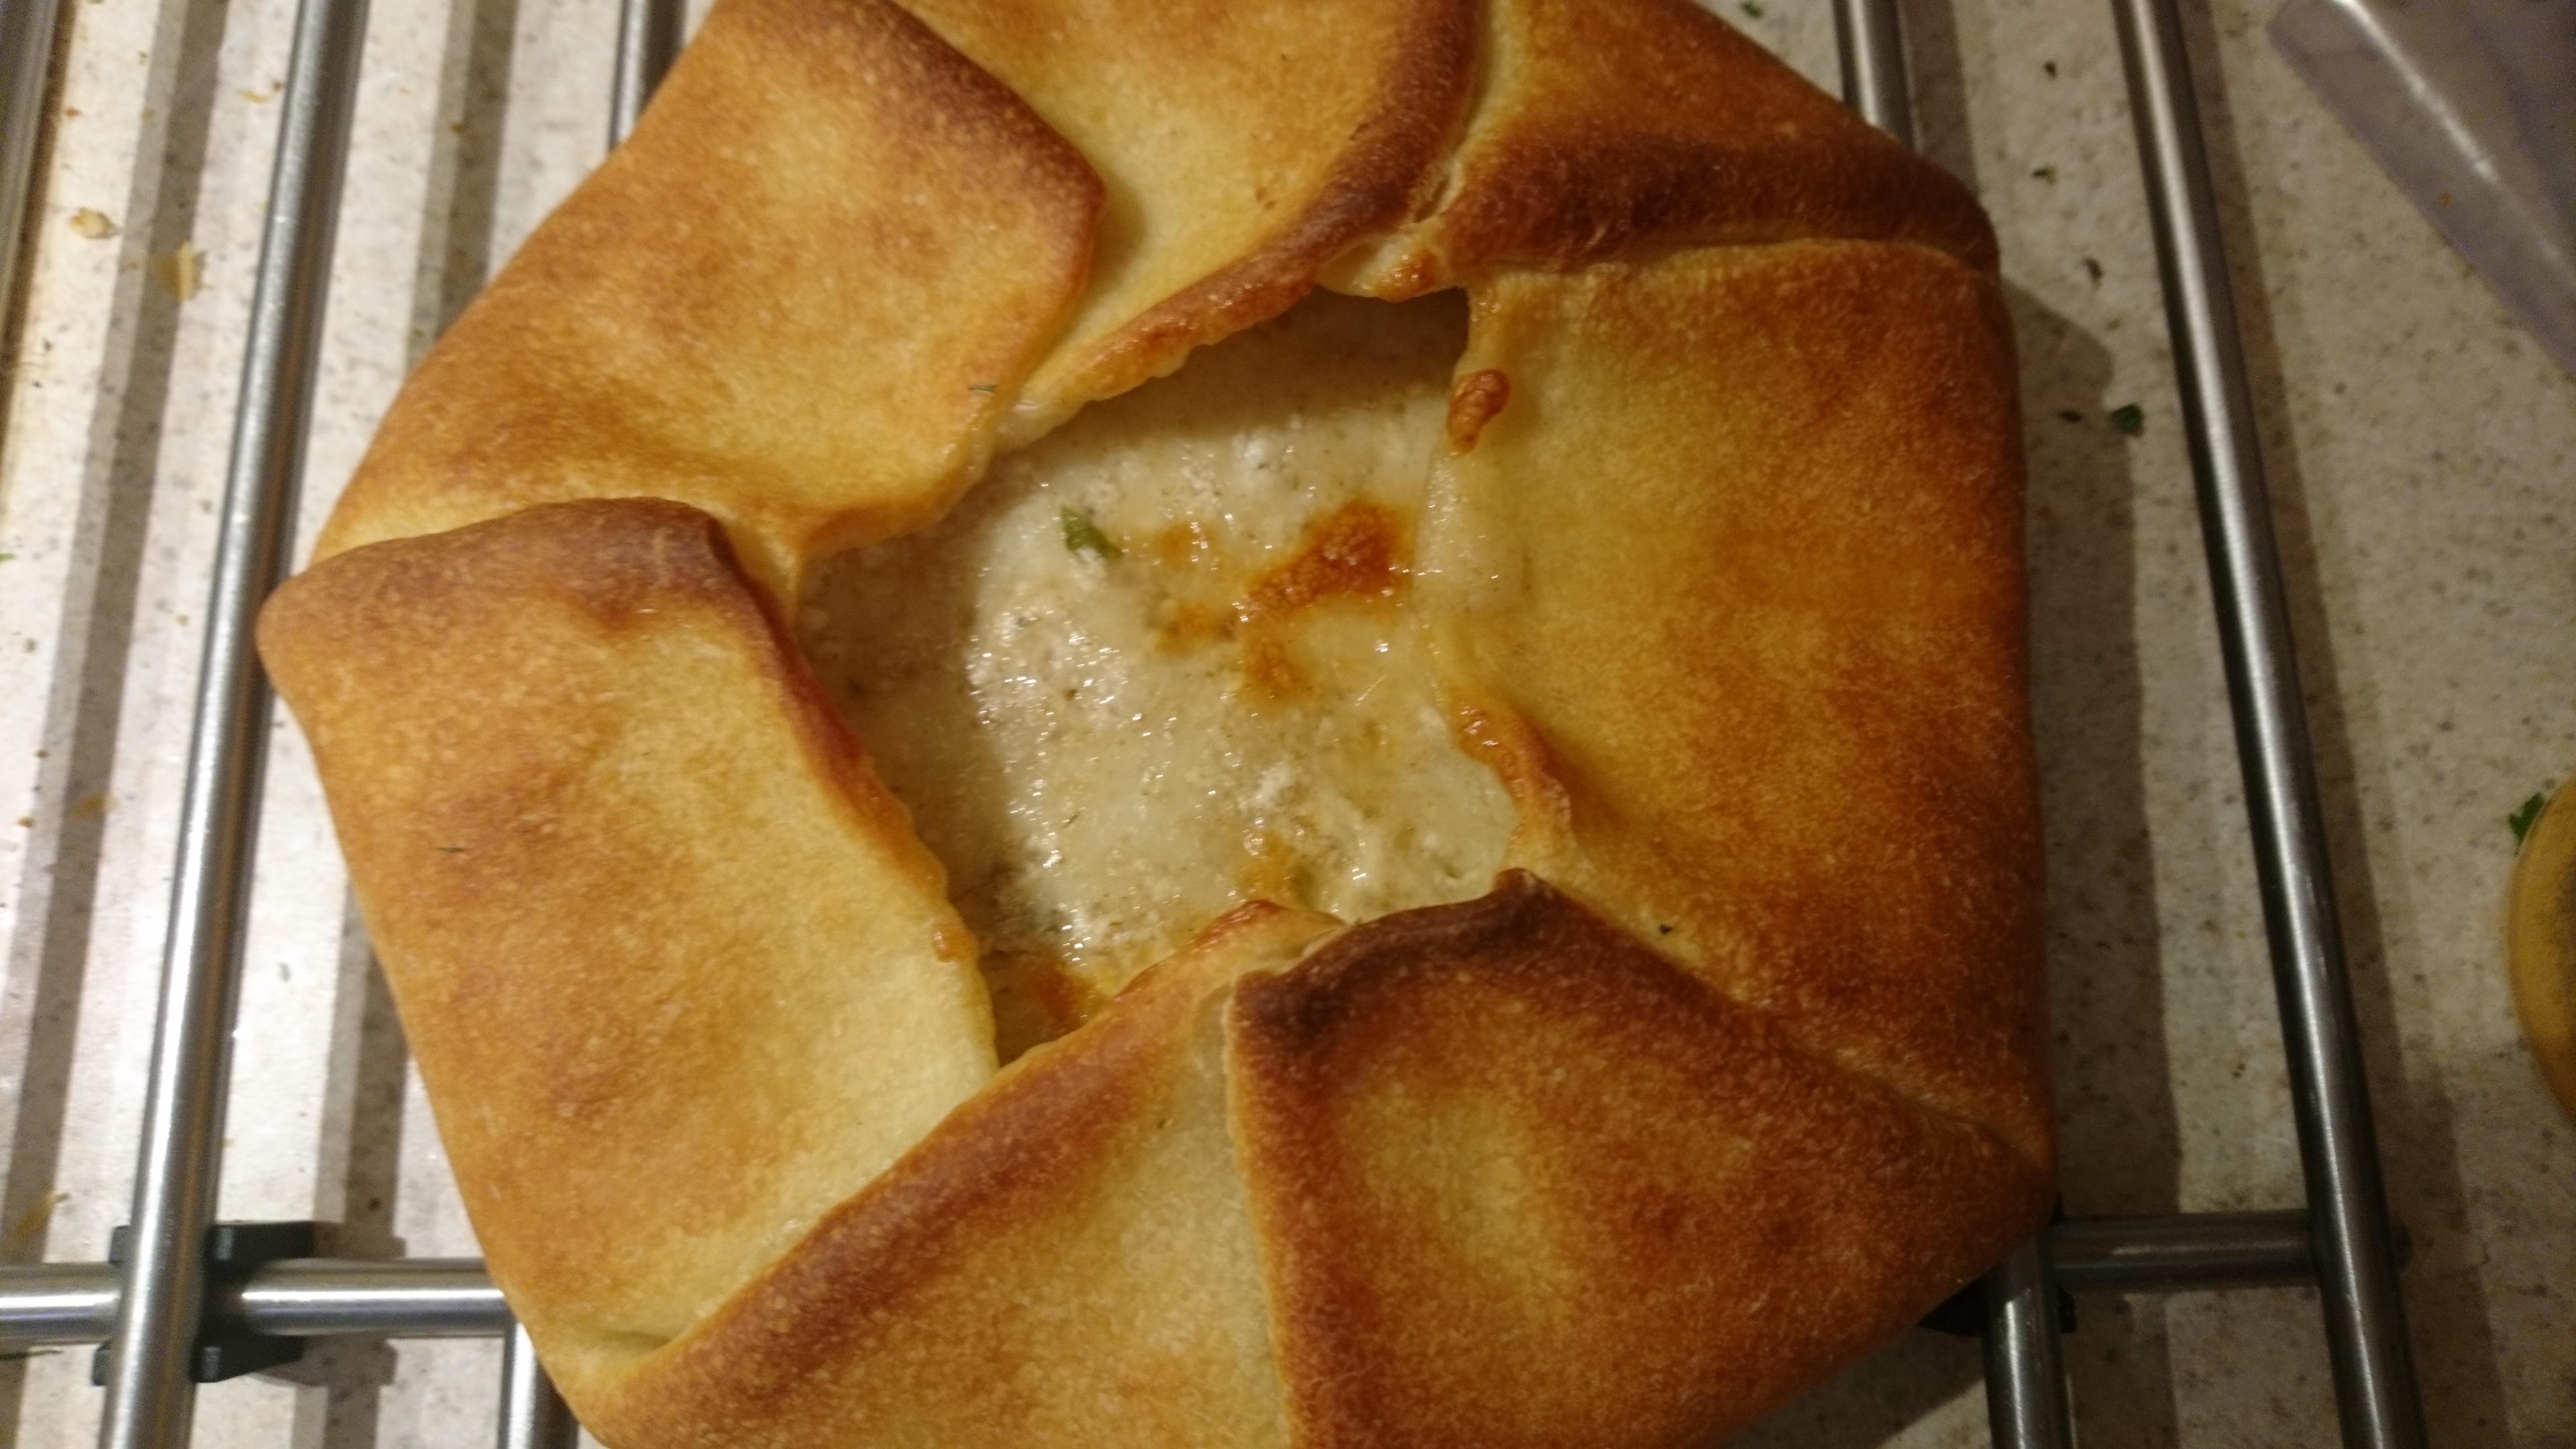 khachipuri bread, cooked